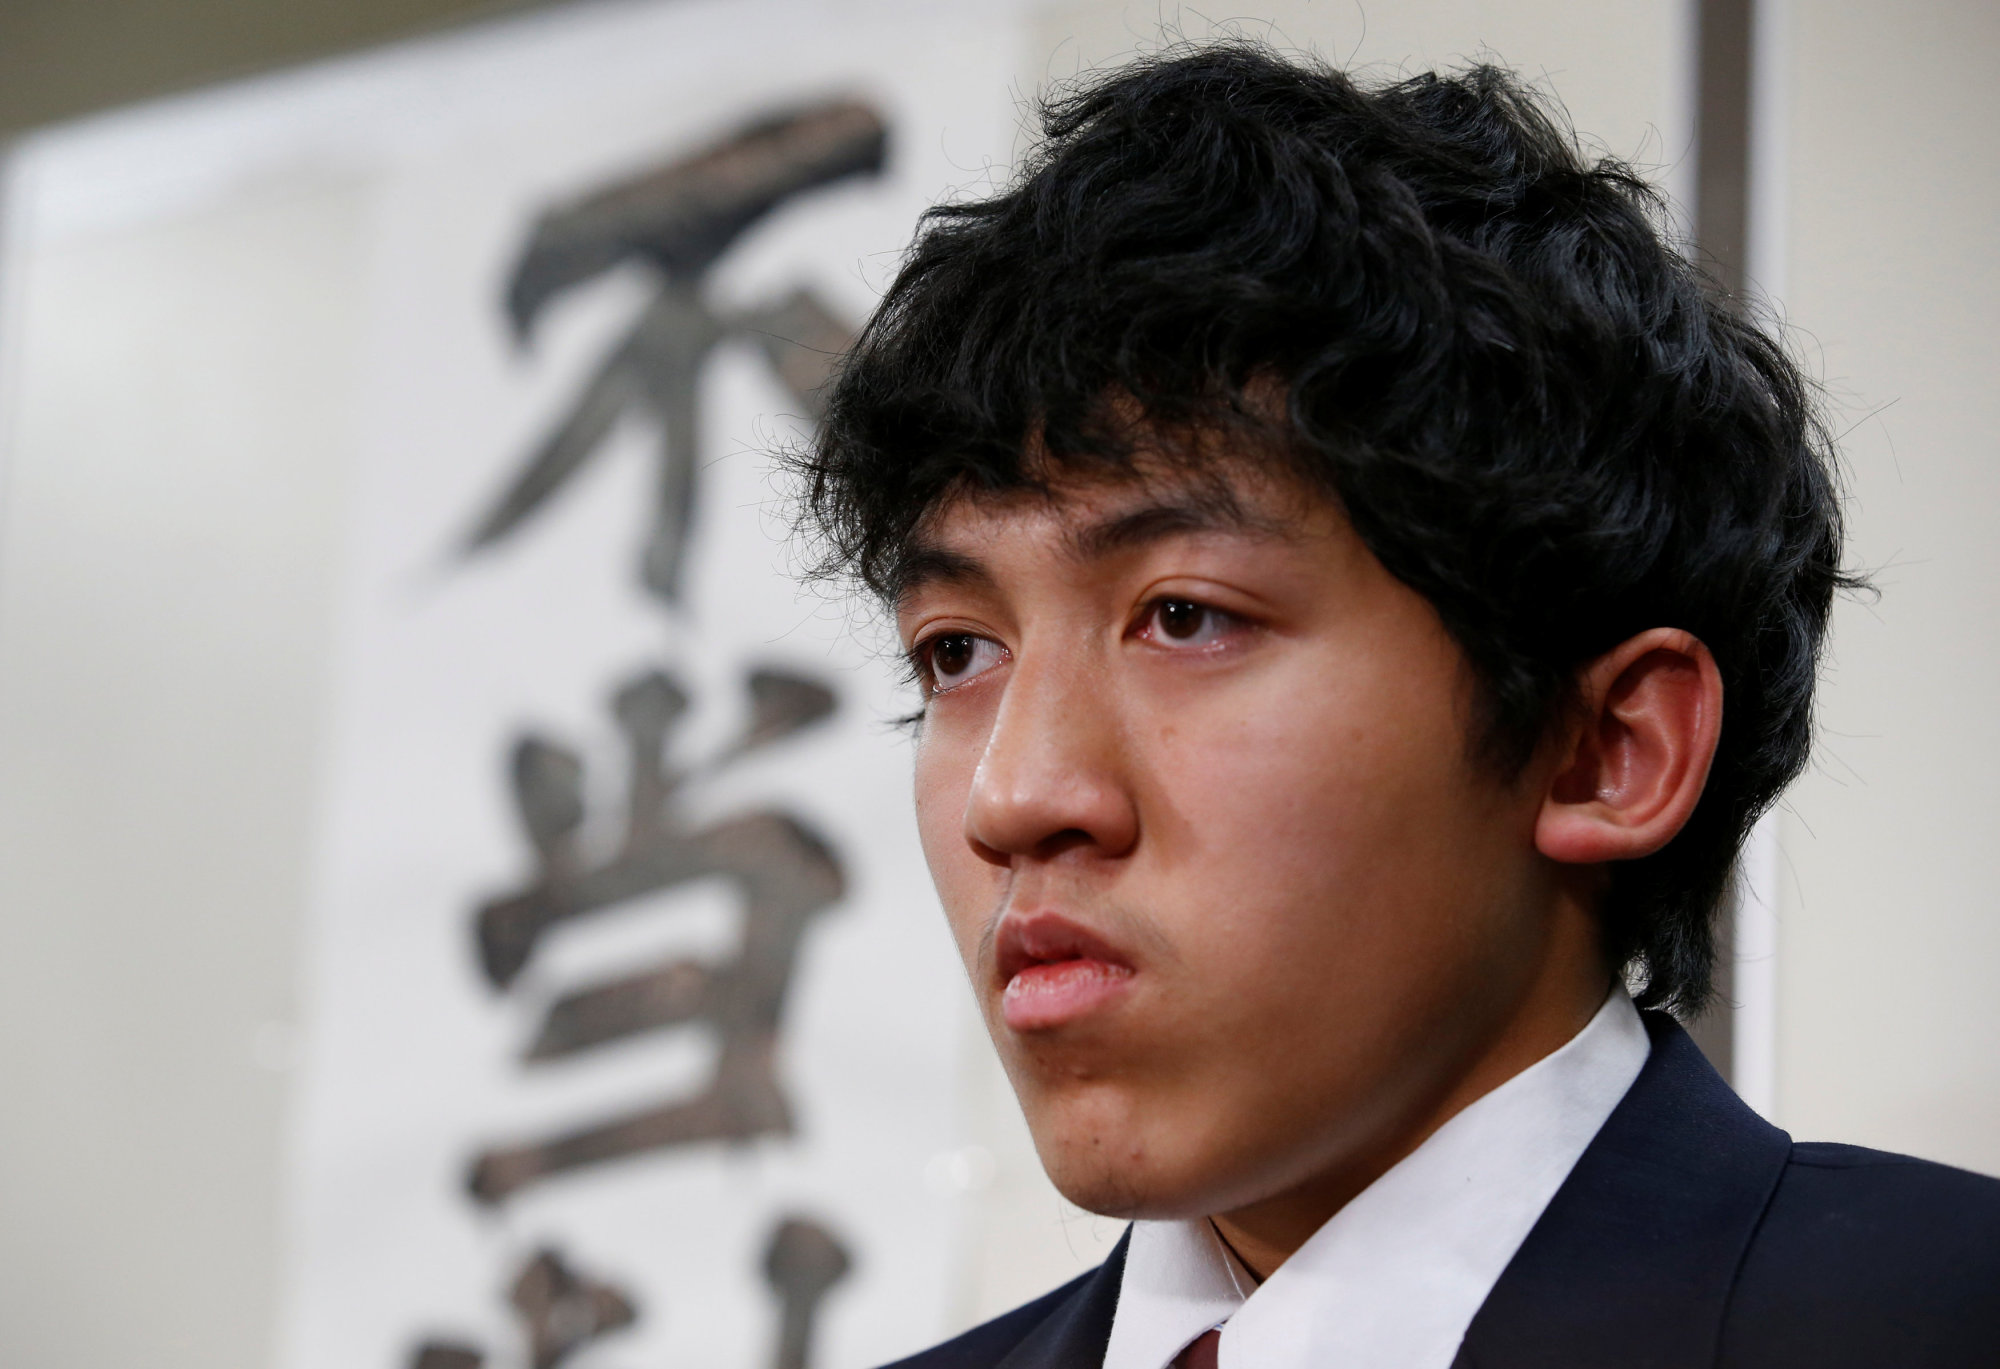 Utinan Won, a 16-year-old high school student living in Japan without a visa, attends a news conference in Tokyo on Tuesday. The characters on the wall are part of a banner that reads, 'Unjust ruling.' | REUTERS